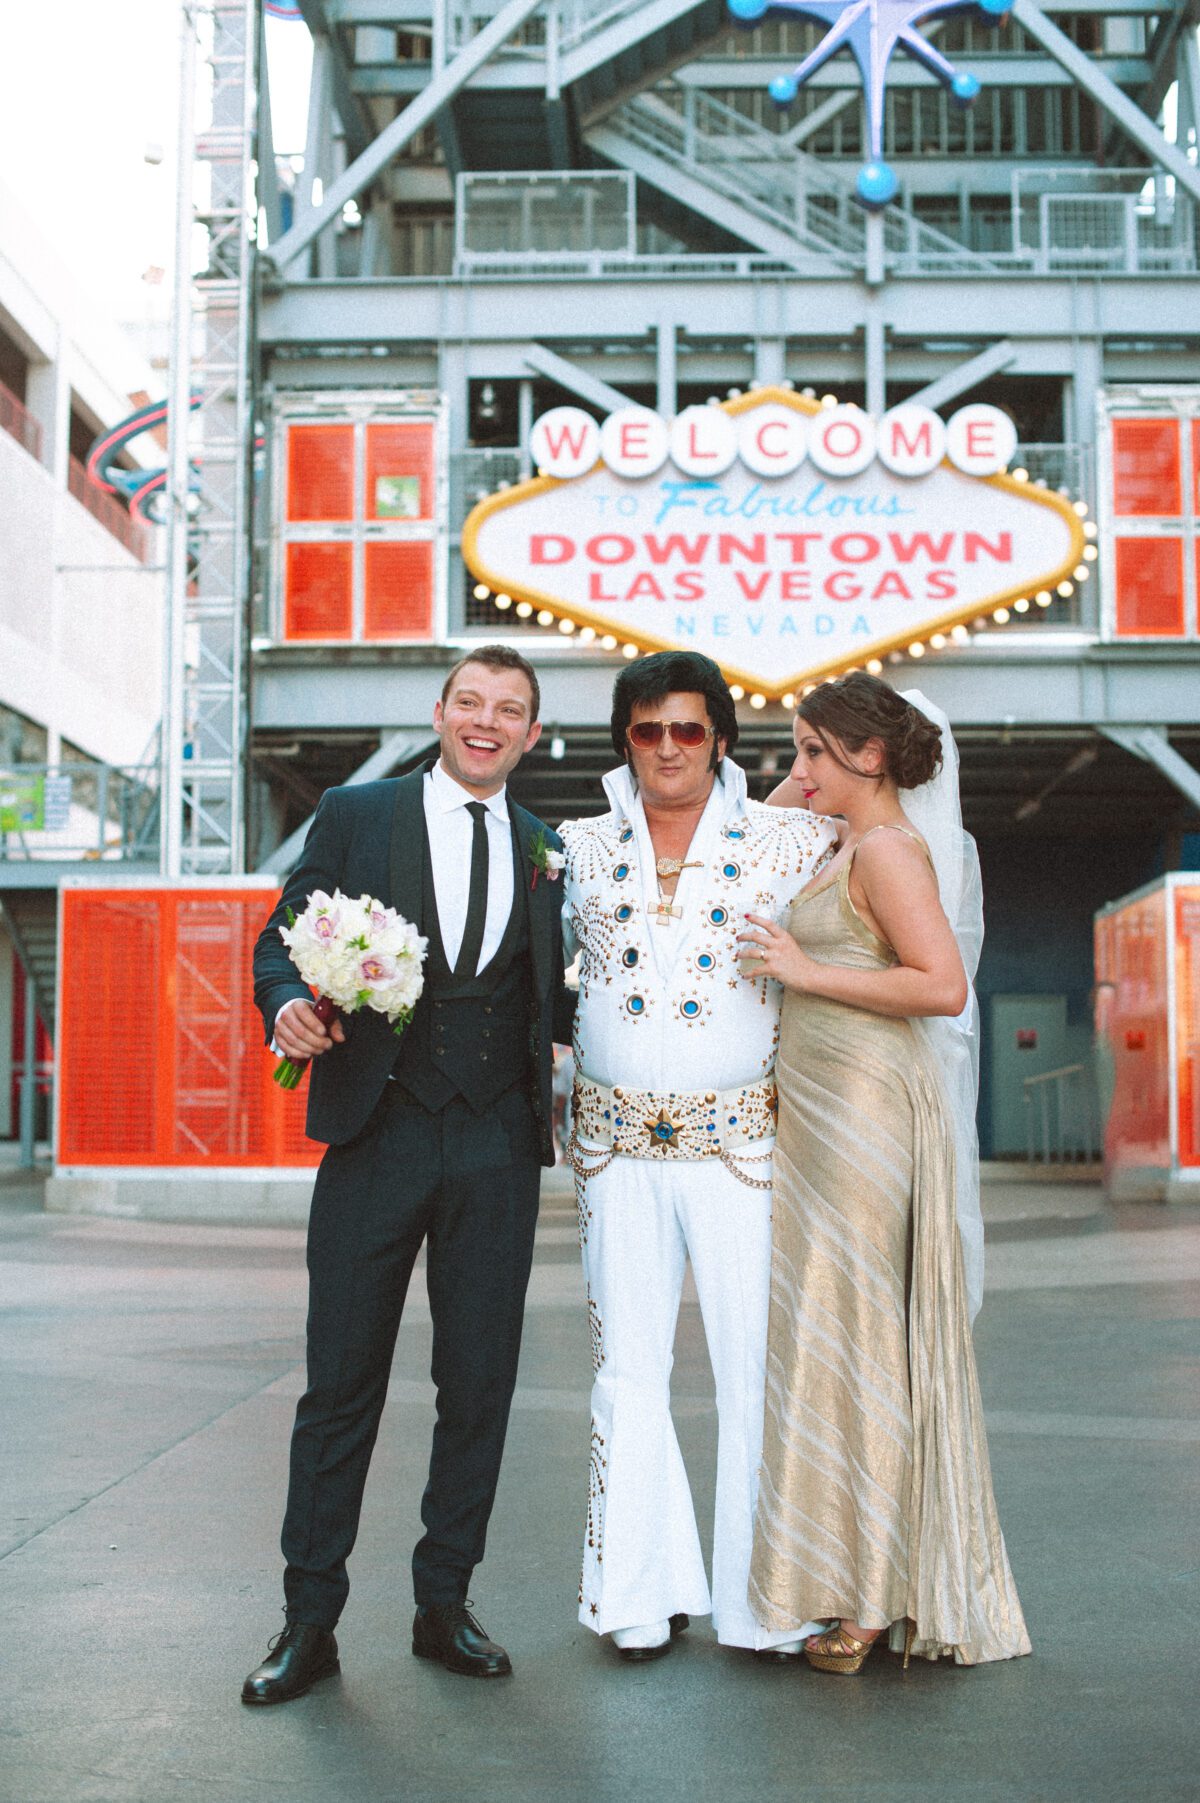 Las Vegas elopement photographer captures a bride and groom posing with an Elvis impersonator in front of the Downtown Las Vegas sign